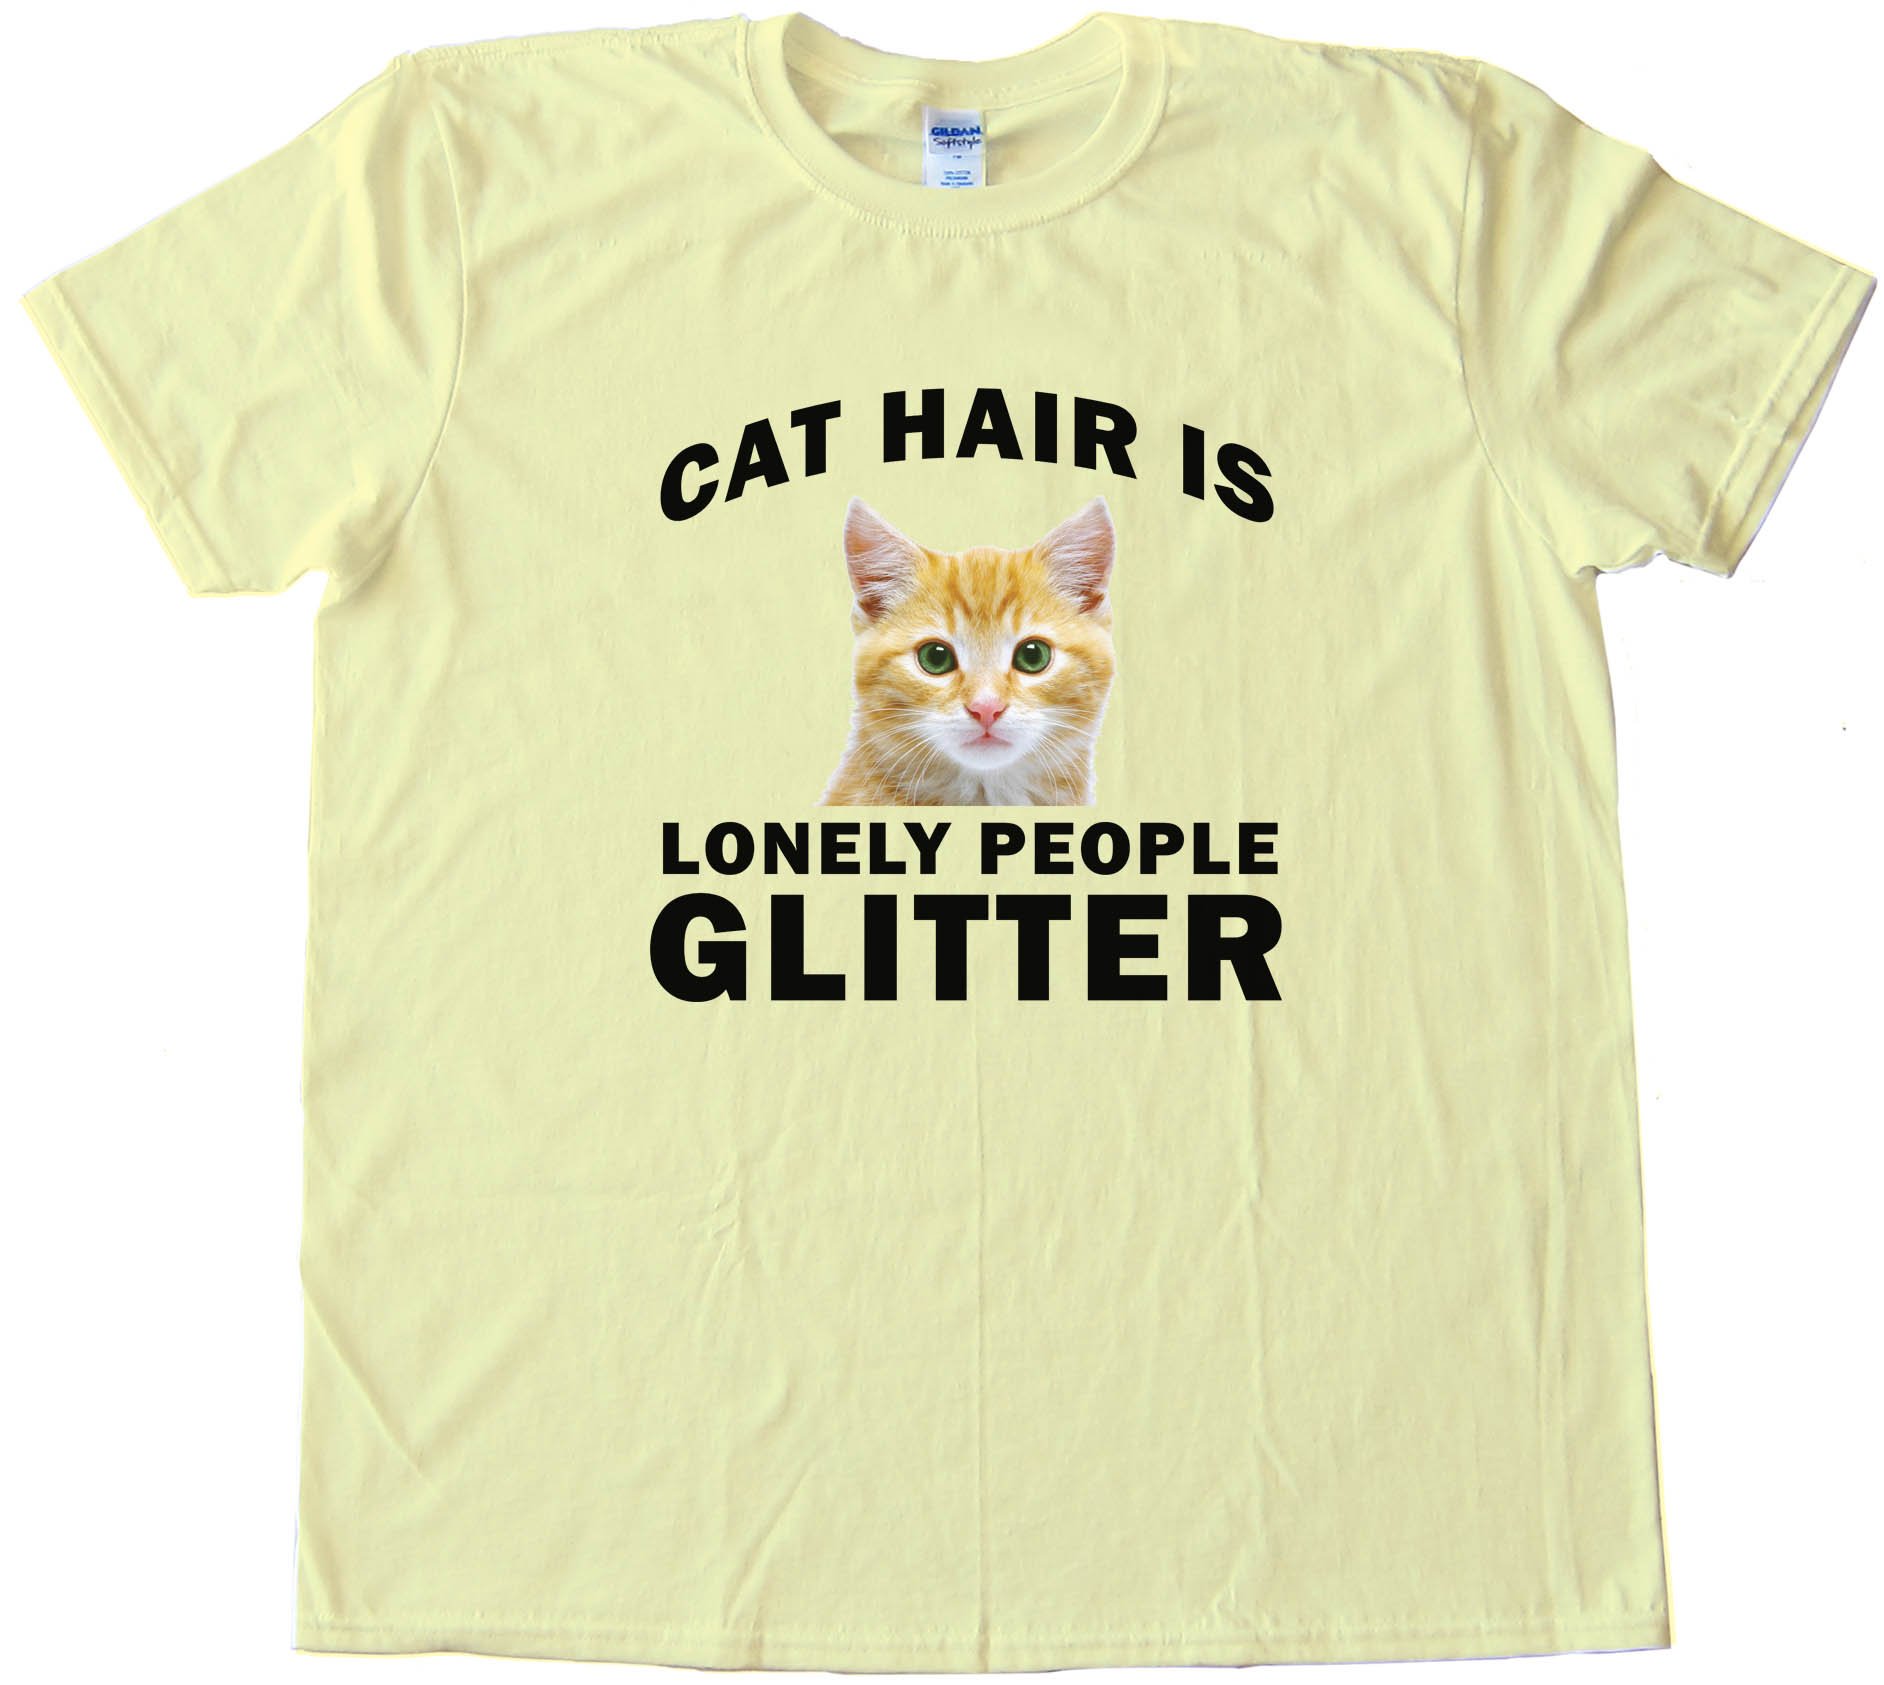 Cat Hair Is Lonely People Glitter - Tee Shirt